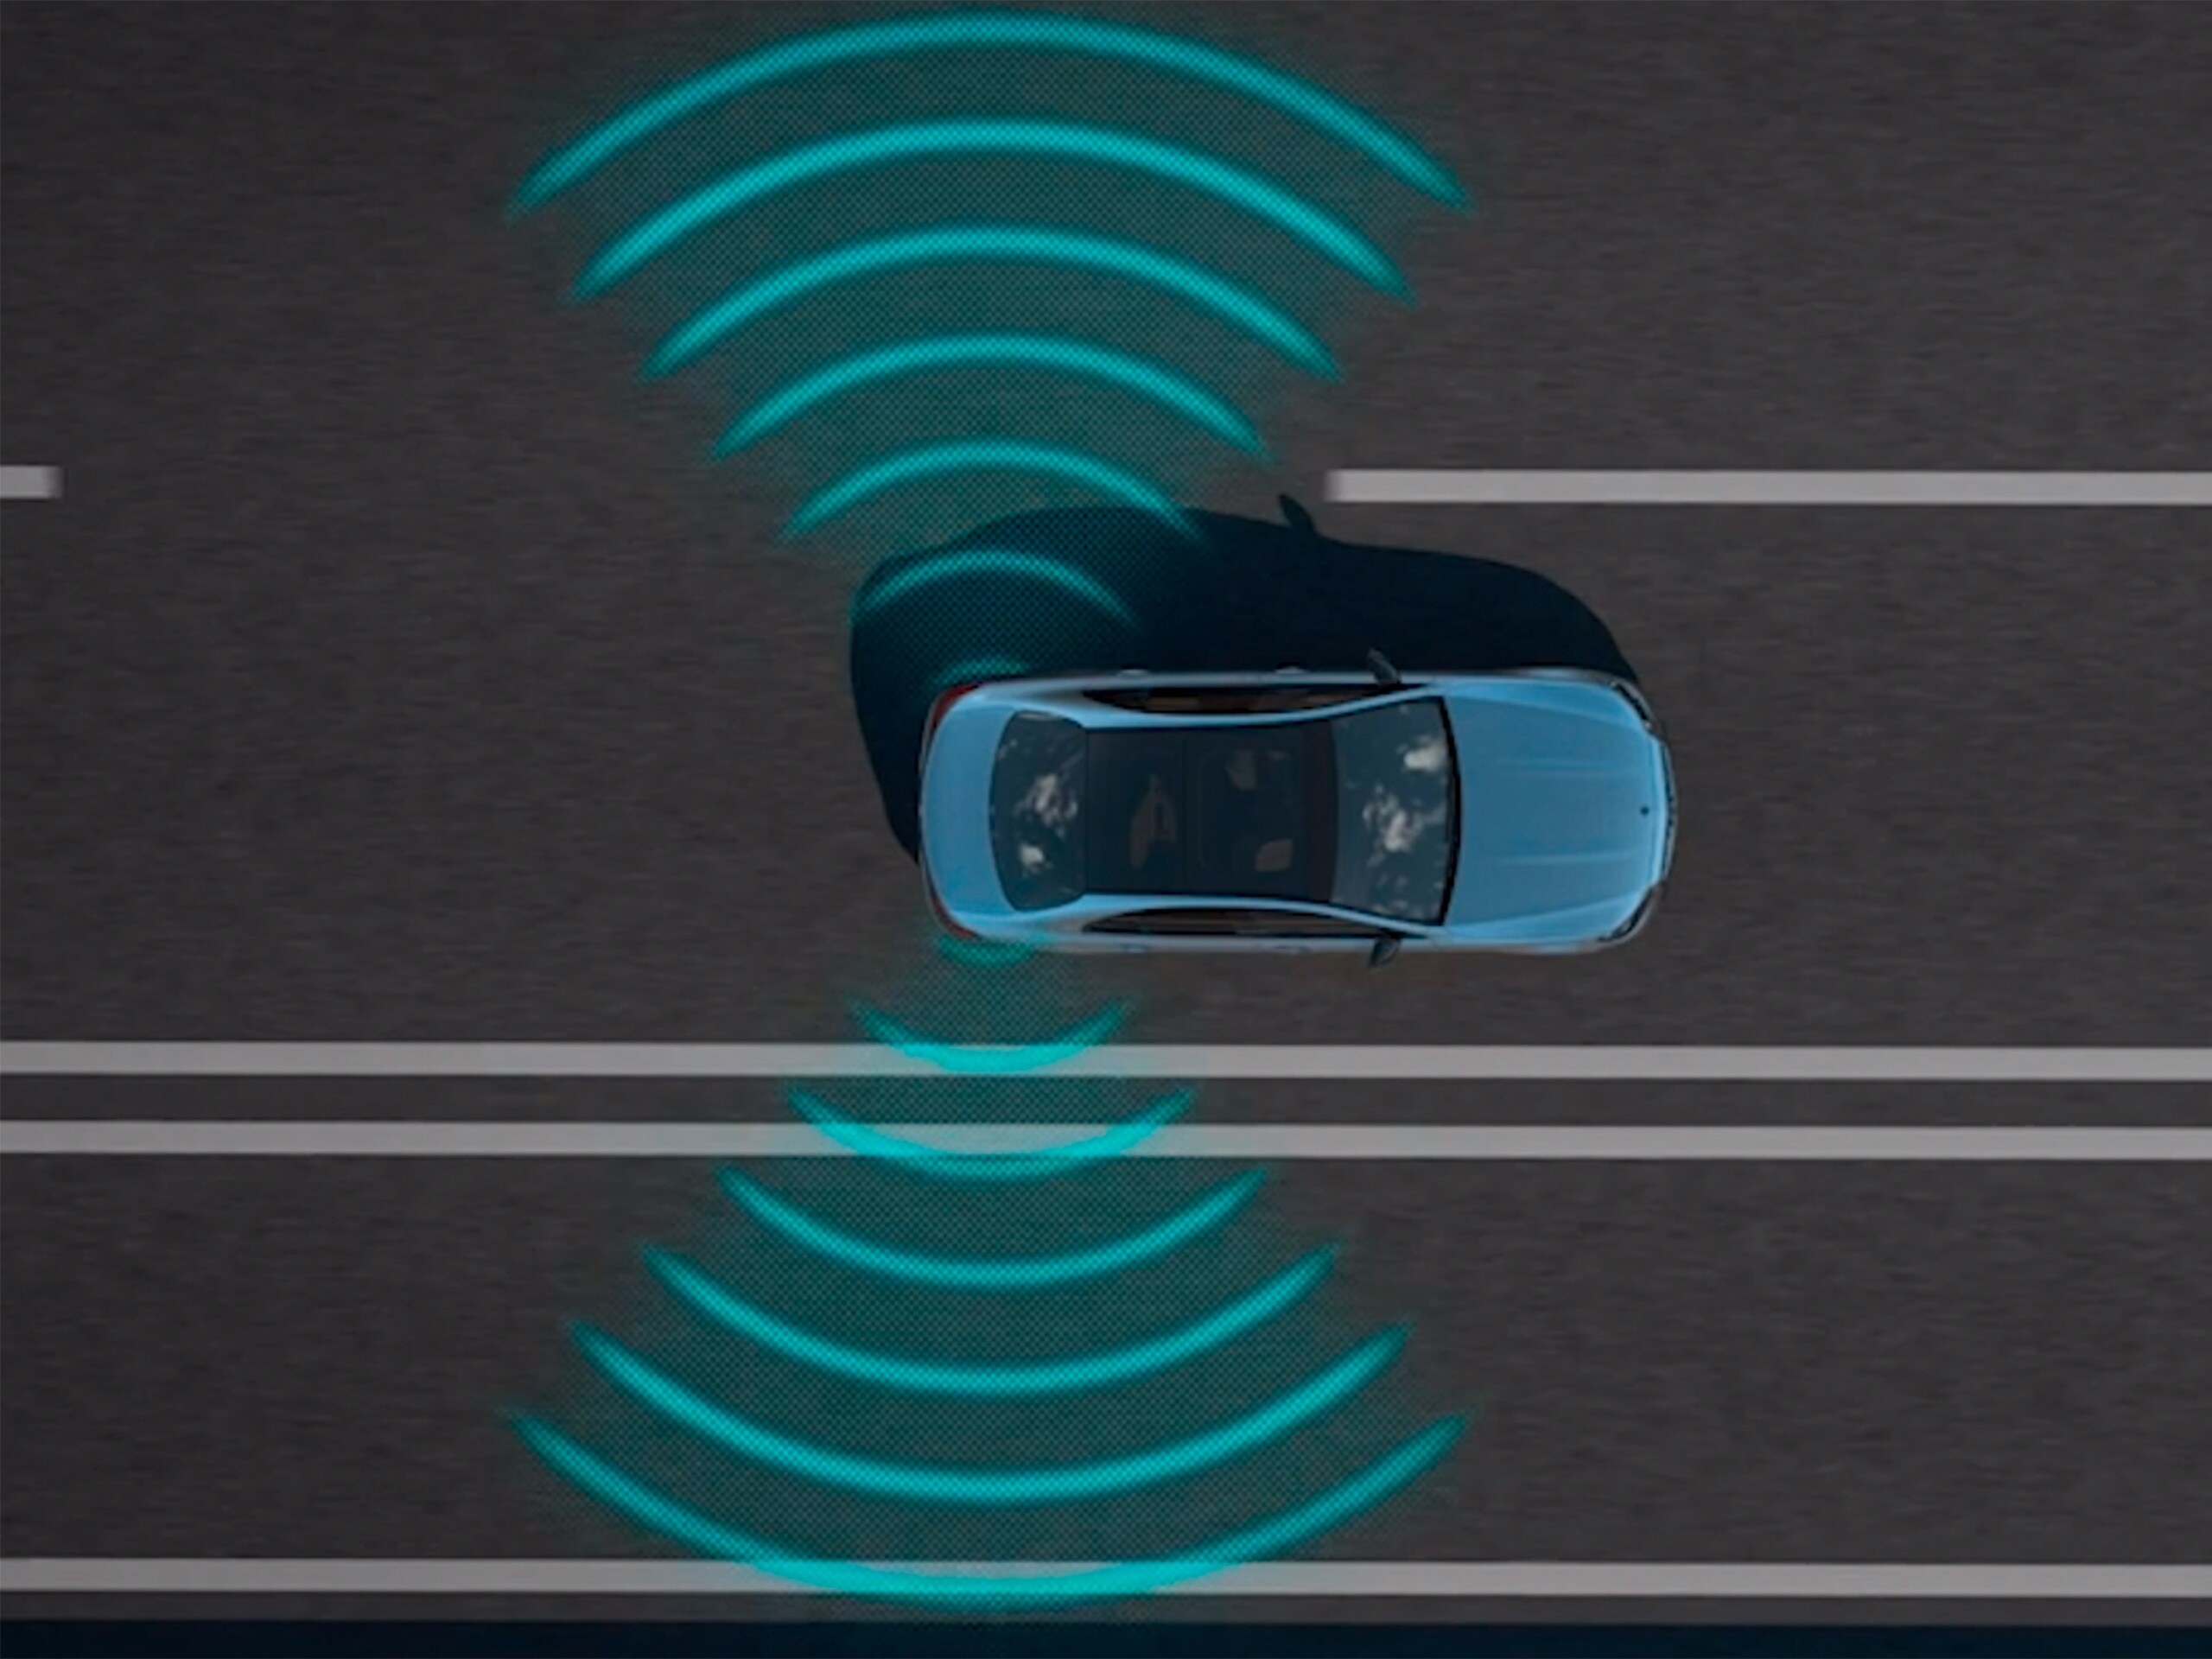 The video shows the function of Active Blind Spot Assist in the Mercedes-Benz CLS Coupé.